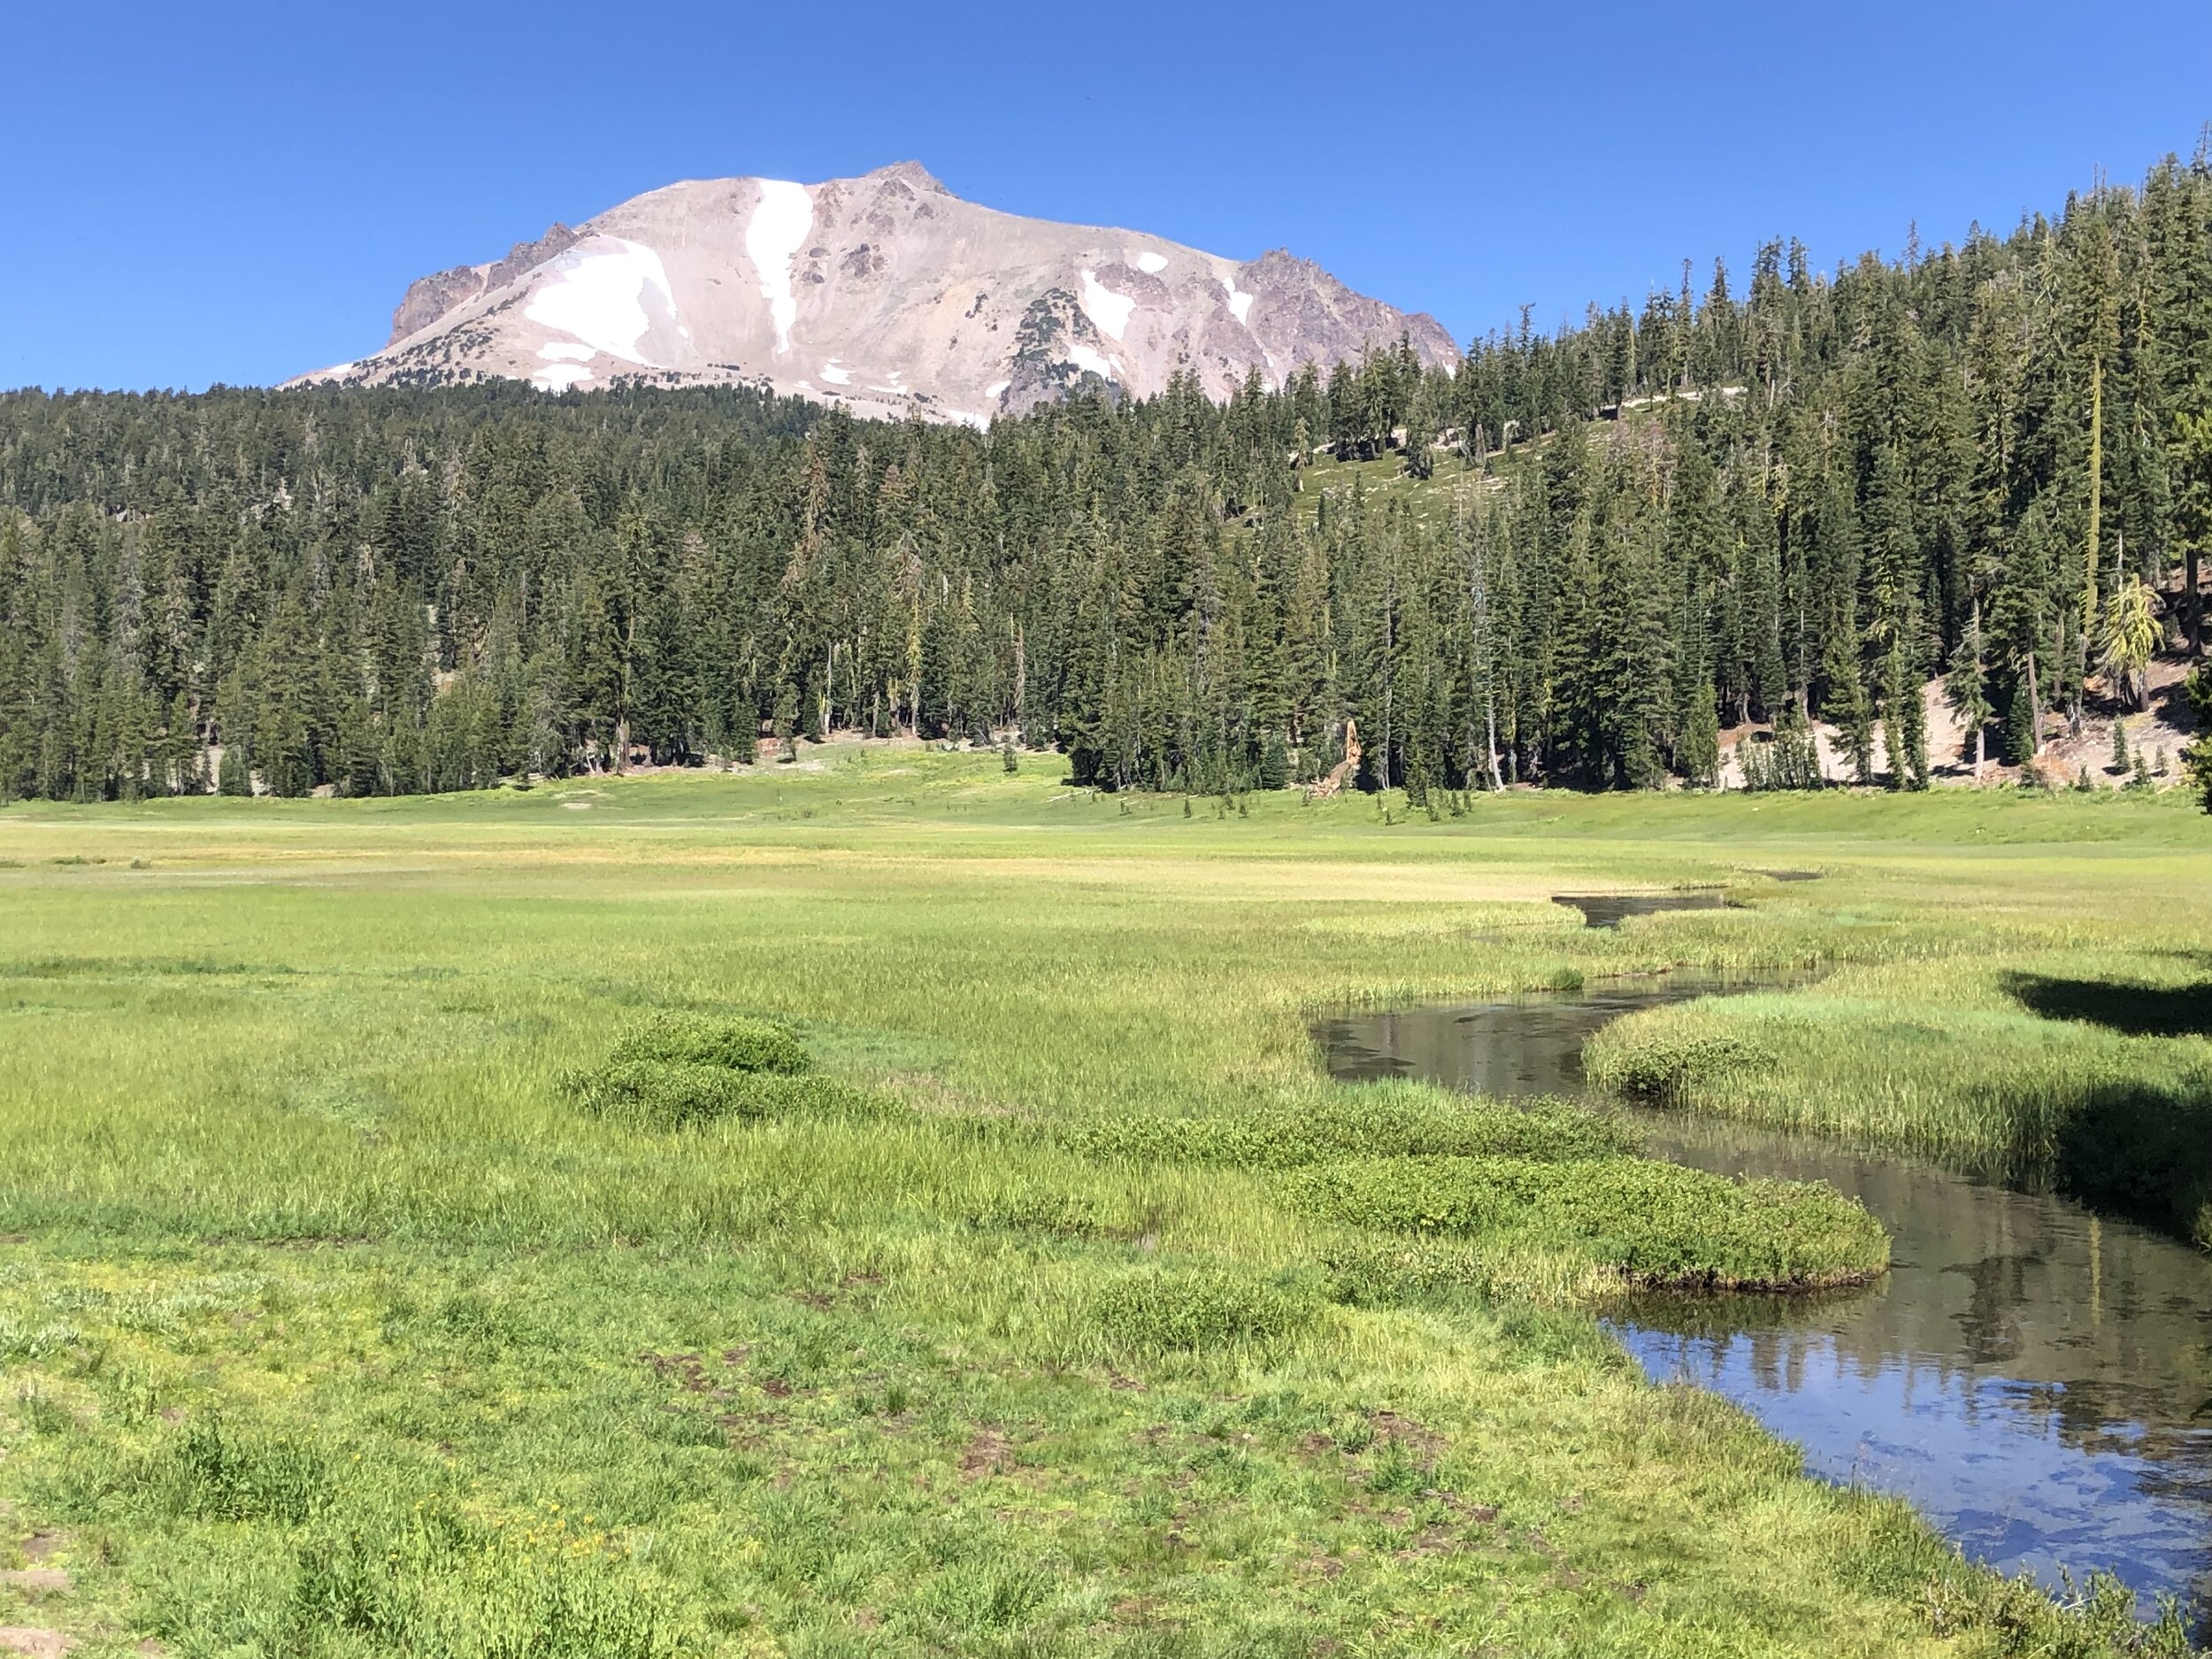 Though Lassen Peak appears to be sleeping peacefully, it’s still an active volcano, as the park’s boiling mud pots, fumaroles, and hot springs clearly illustrate.